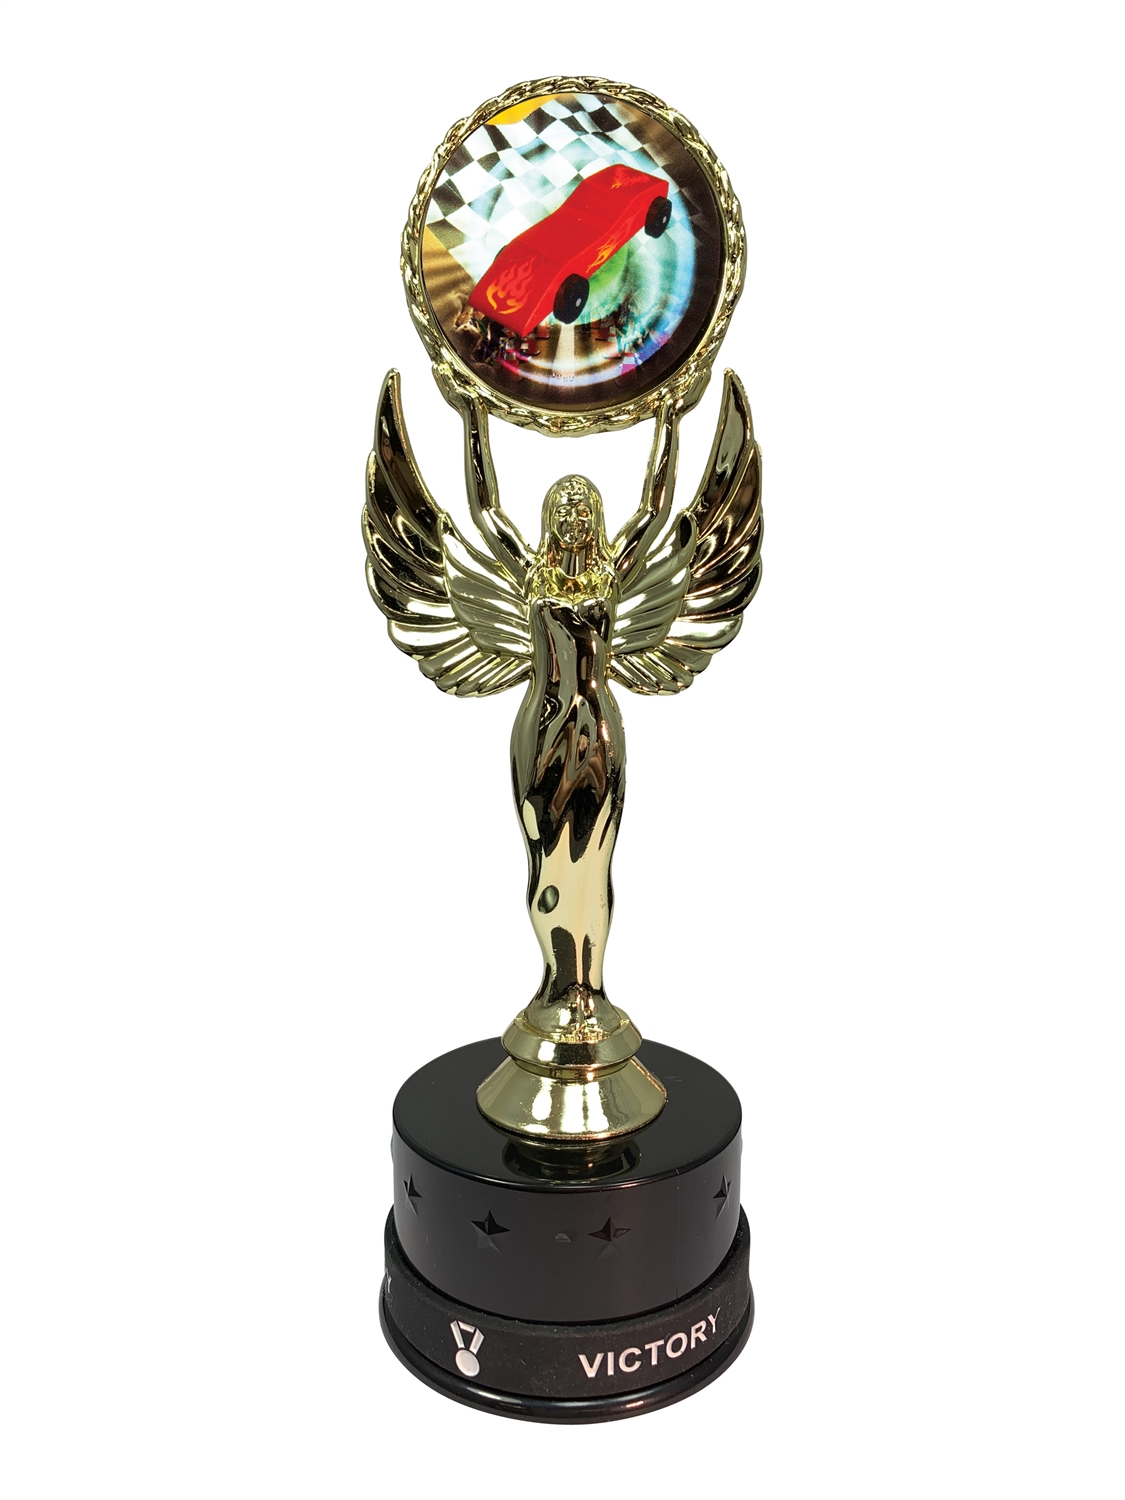 Pinewood Derby Victory Wristband Trophy